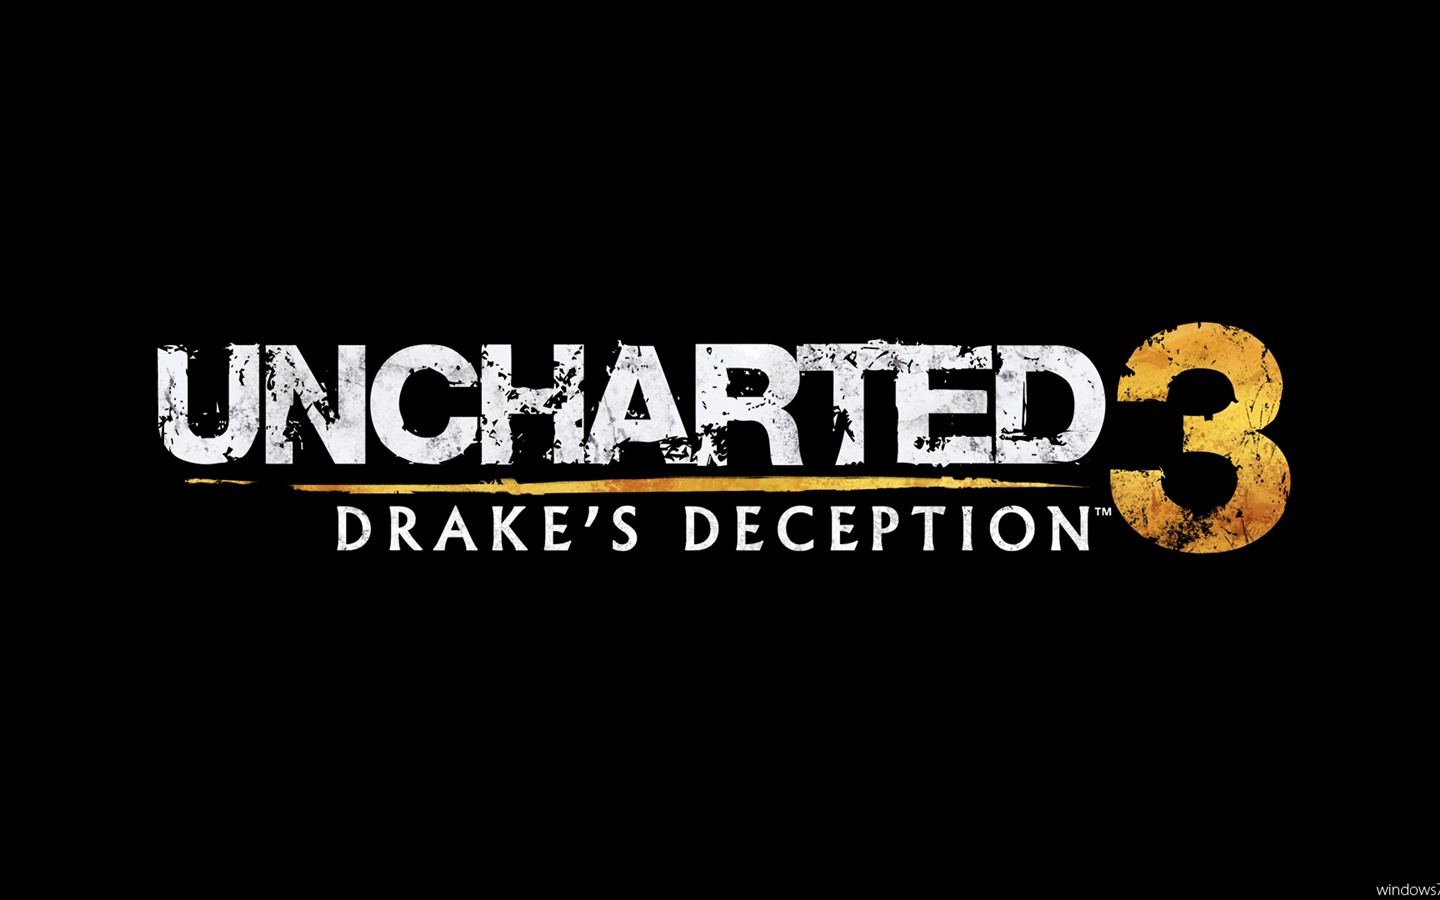 Uncharted 3: Drake's Deception HD wallpapers #13 - 1440x900